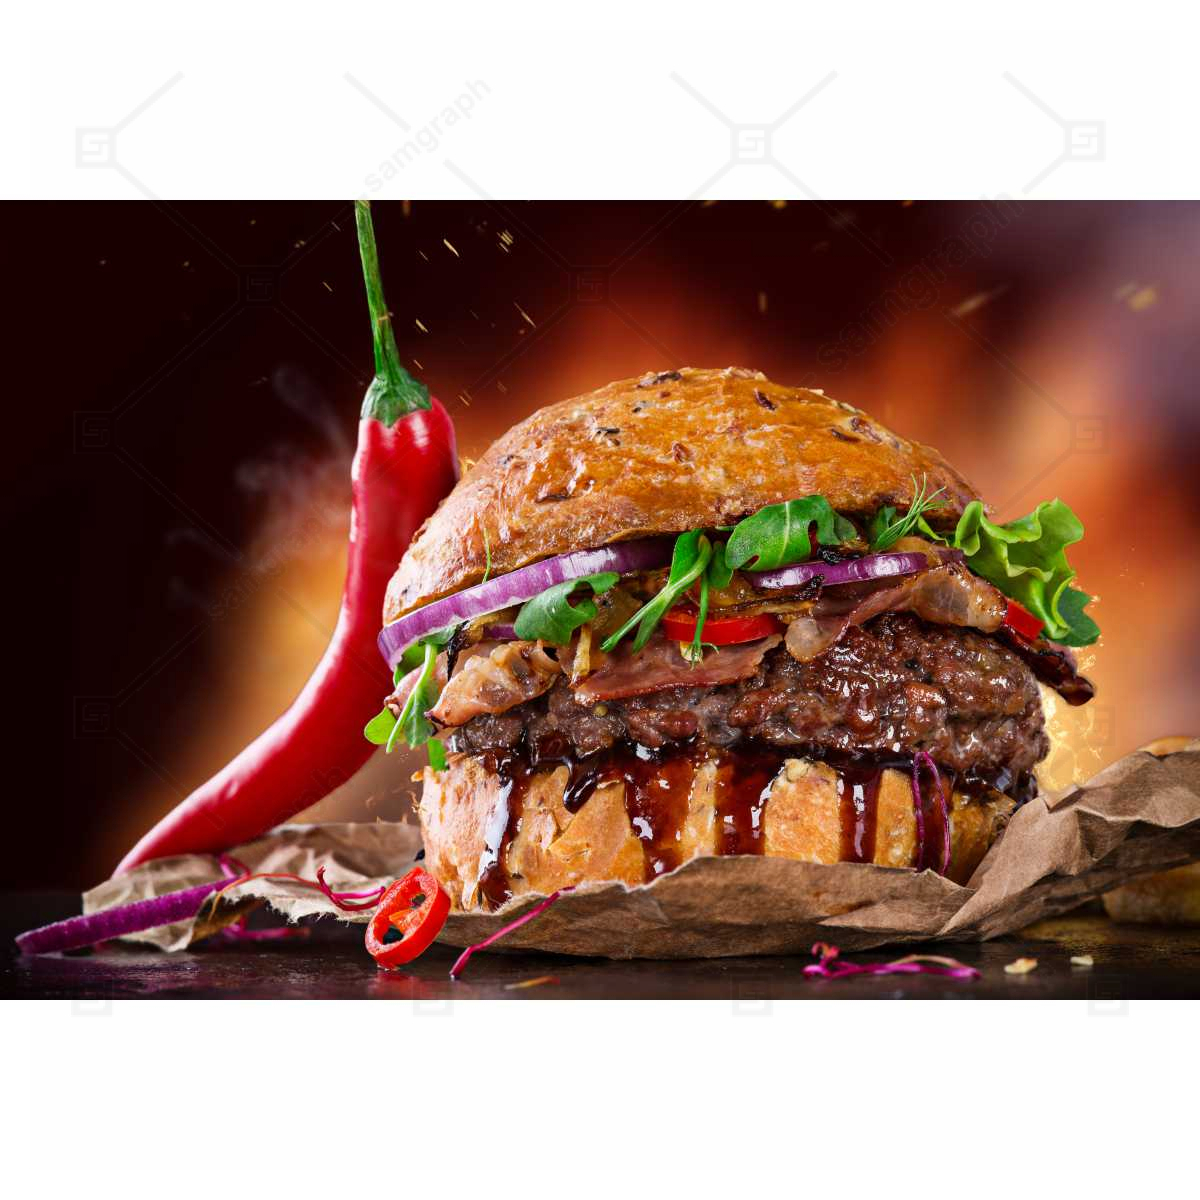 High quality photo of juicy hamburger with fire and pepper lettuce onion parsley 1 وکتور انواع قرص های و داروها